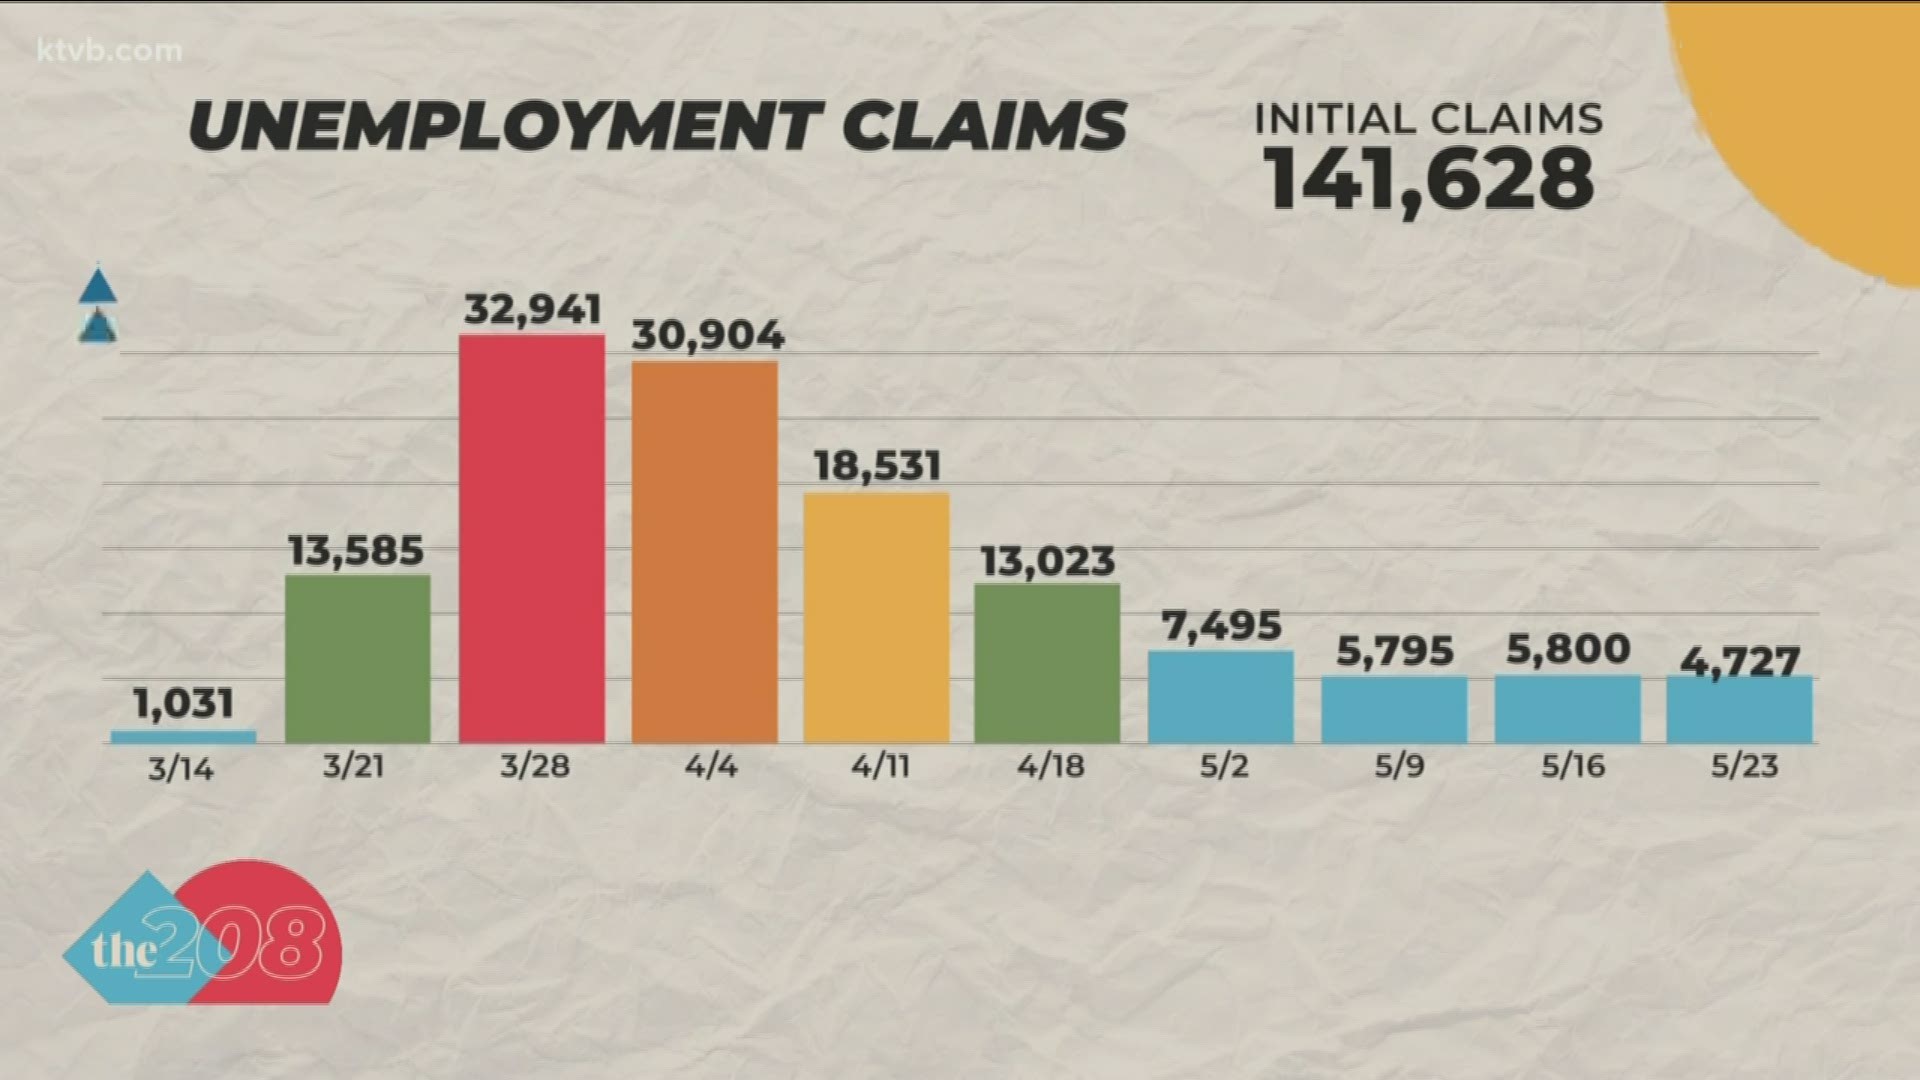 The Idaho Department of Labor said Thursday that 4,700 people filed claims last week, a drop of about 1,100 from the week before.